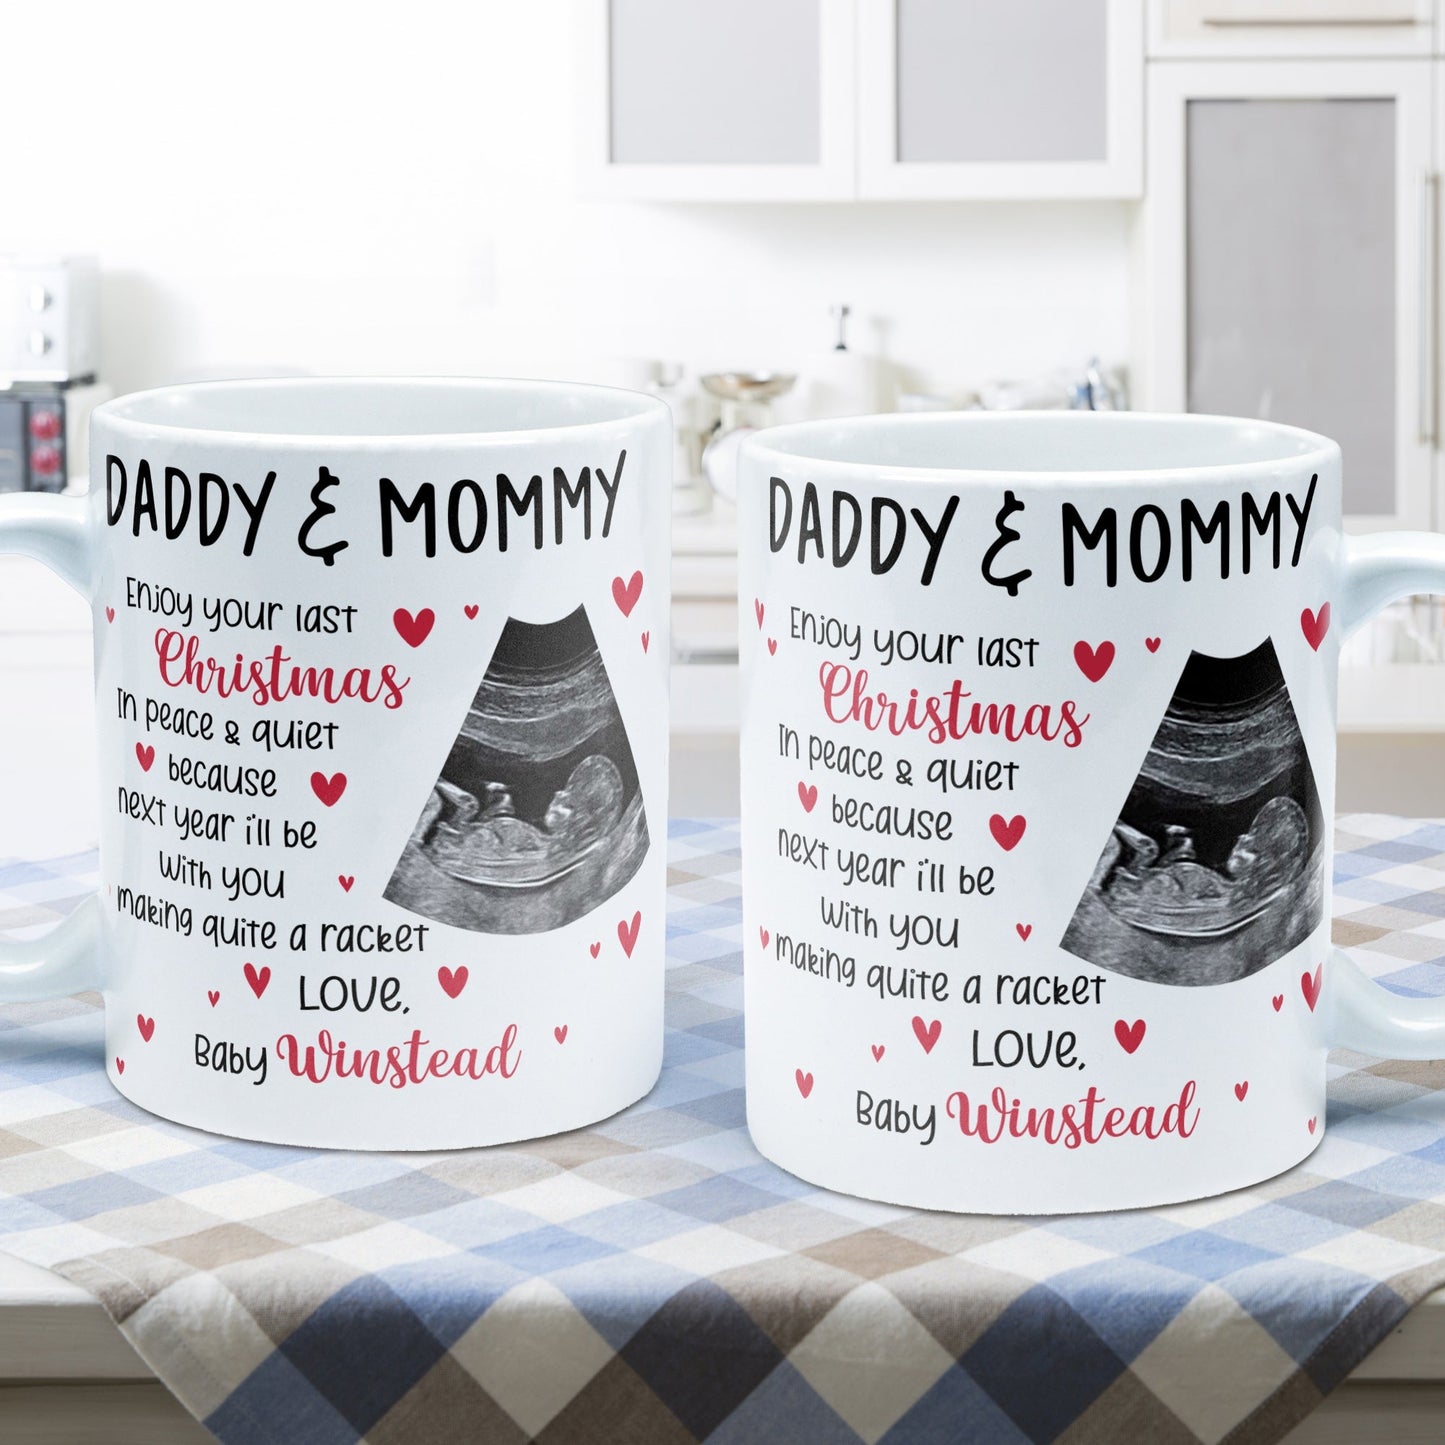 This Christmas, I'll Be Suggled Up In Mommy's Tummy - Personalized Mug - Christmas Gift For Daddy-To-Be, Father, Grandma, Grandpa, Family Members - From Baby, Bump